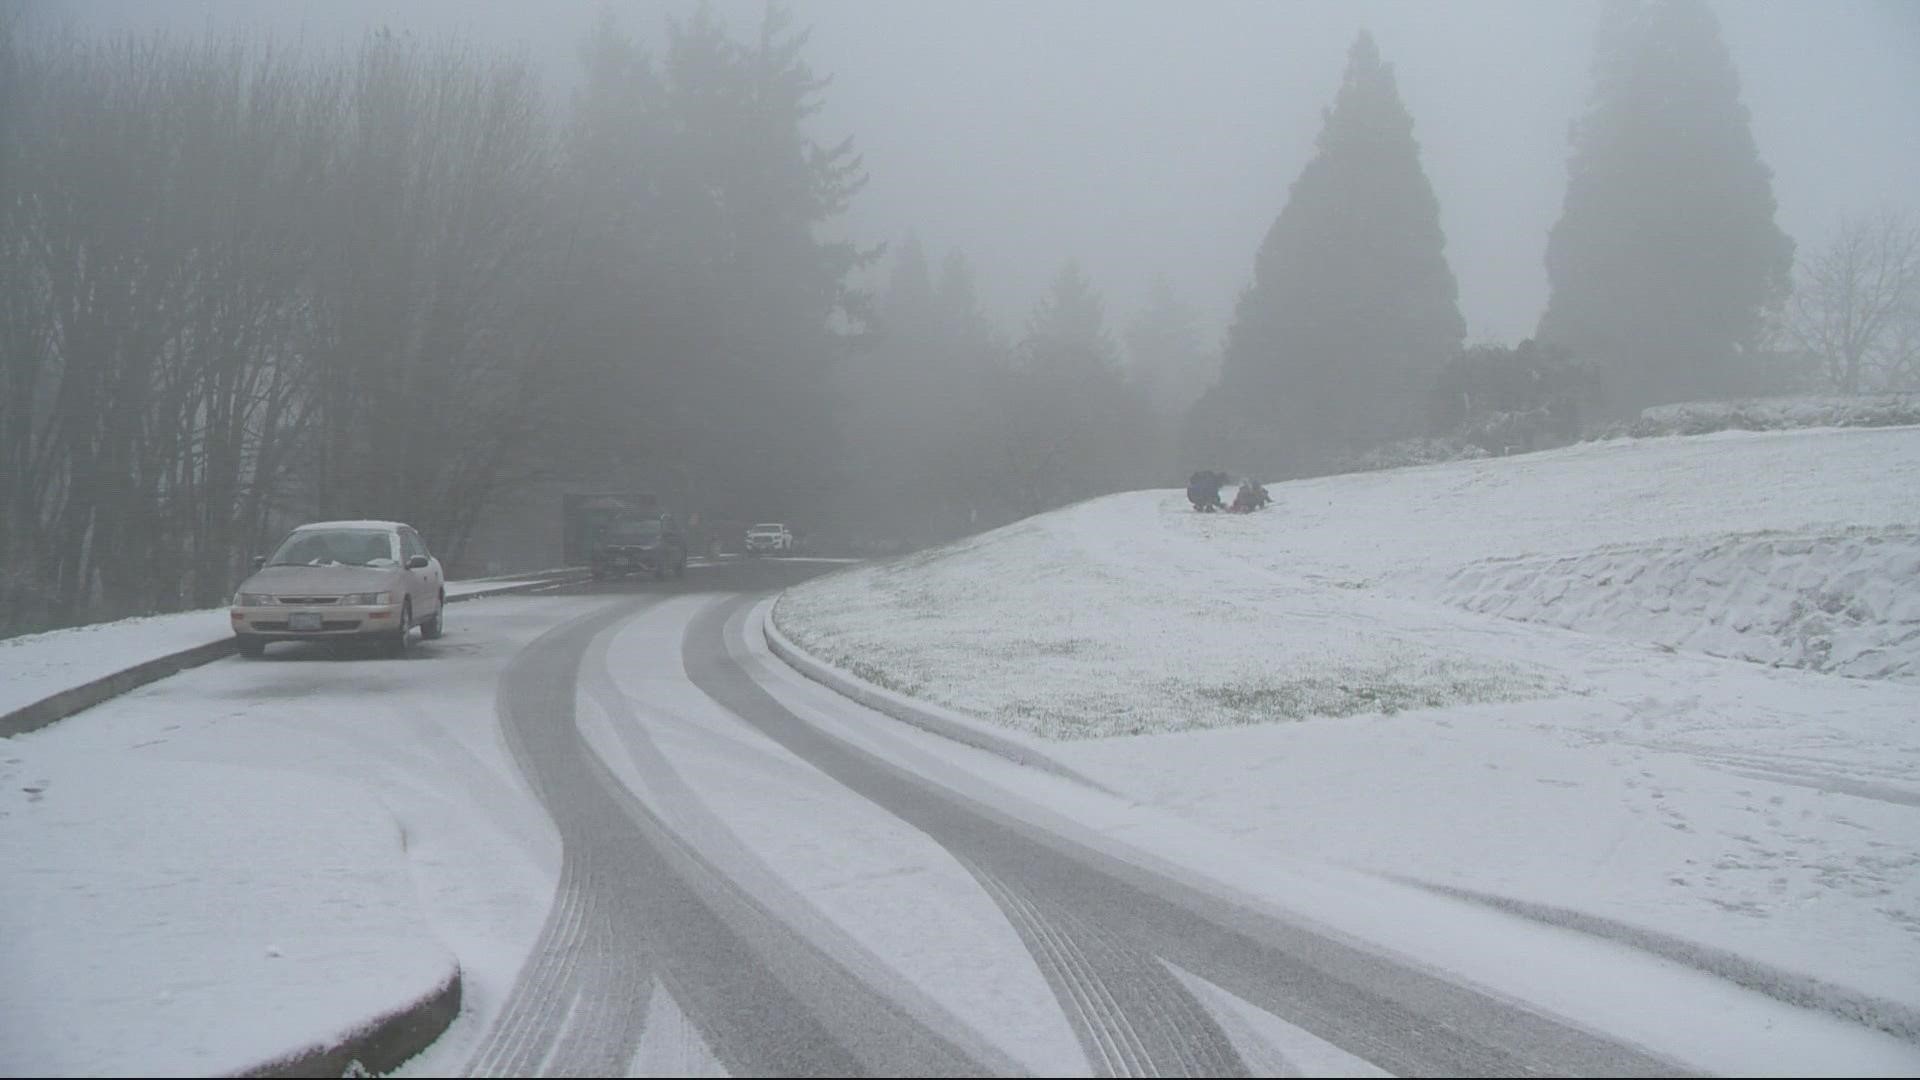 Sunday brought the first snowfall of the season in the Portland metro area clearing the way for fun winter activities.